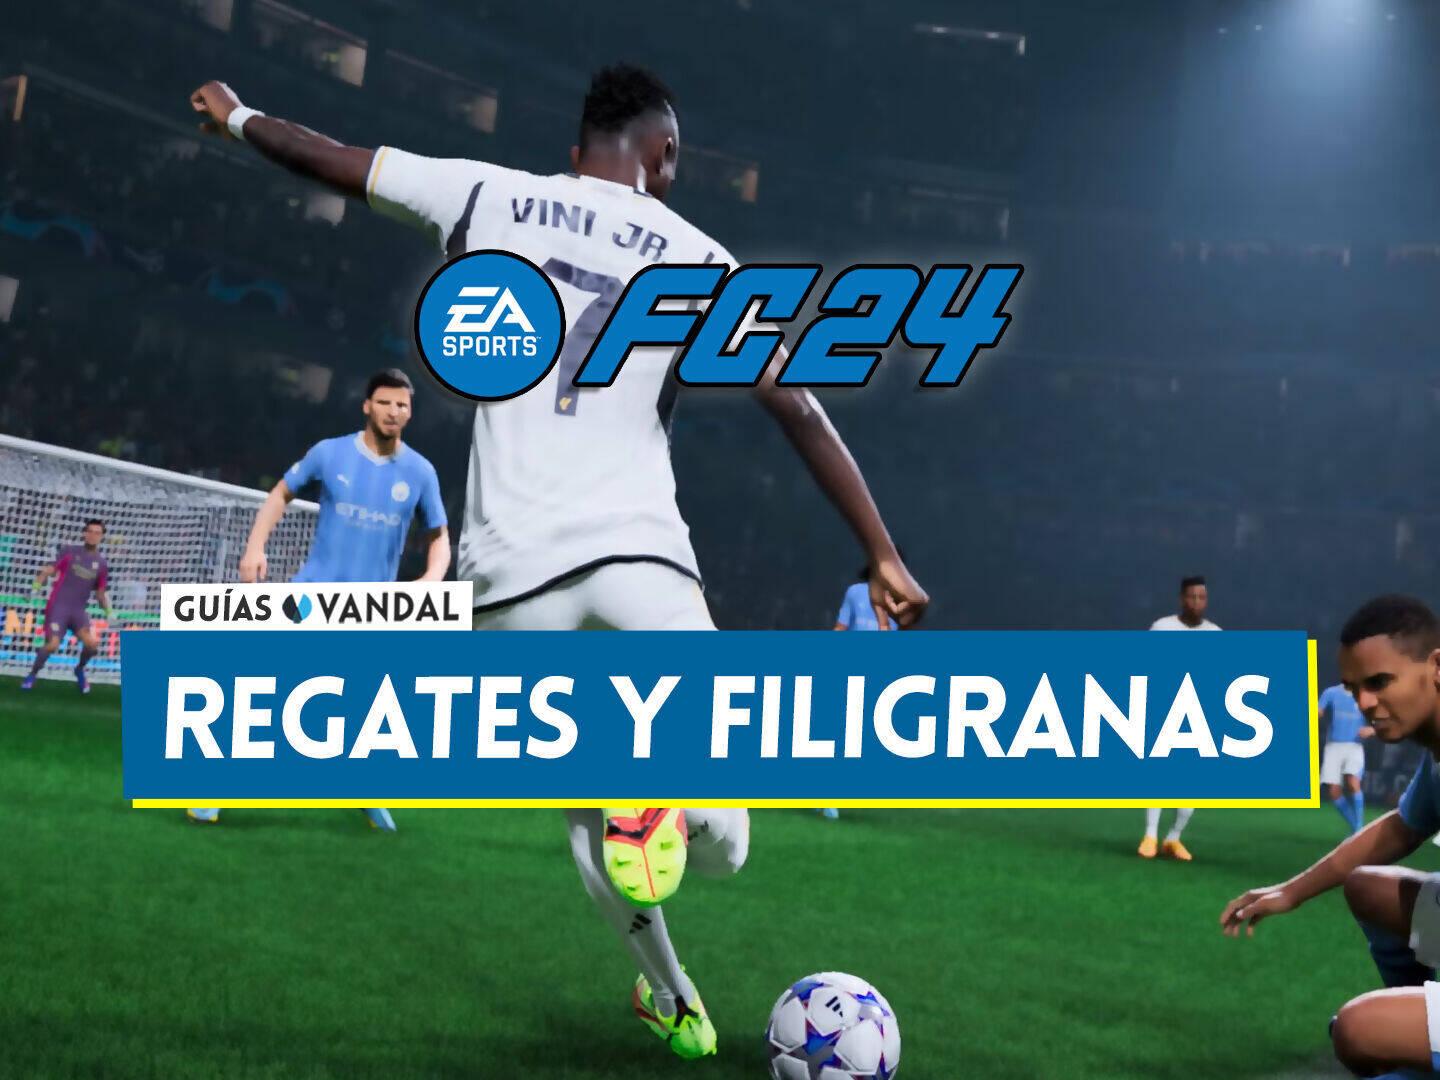 FIFA 18 - Videojuego (PS4, Switch, PS3, Xbox One, PC y Xbox 360) - Vandal